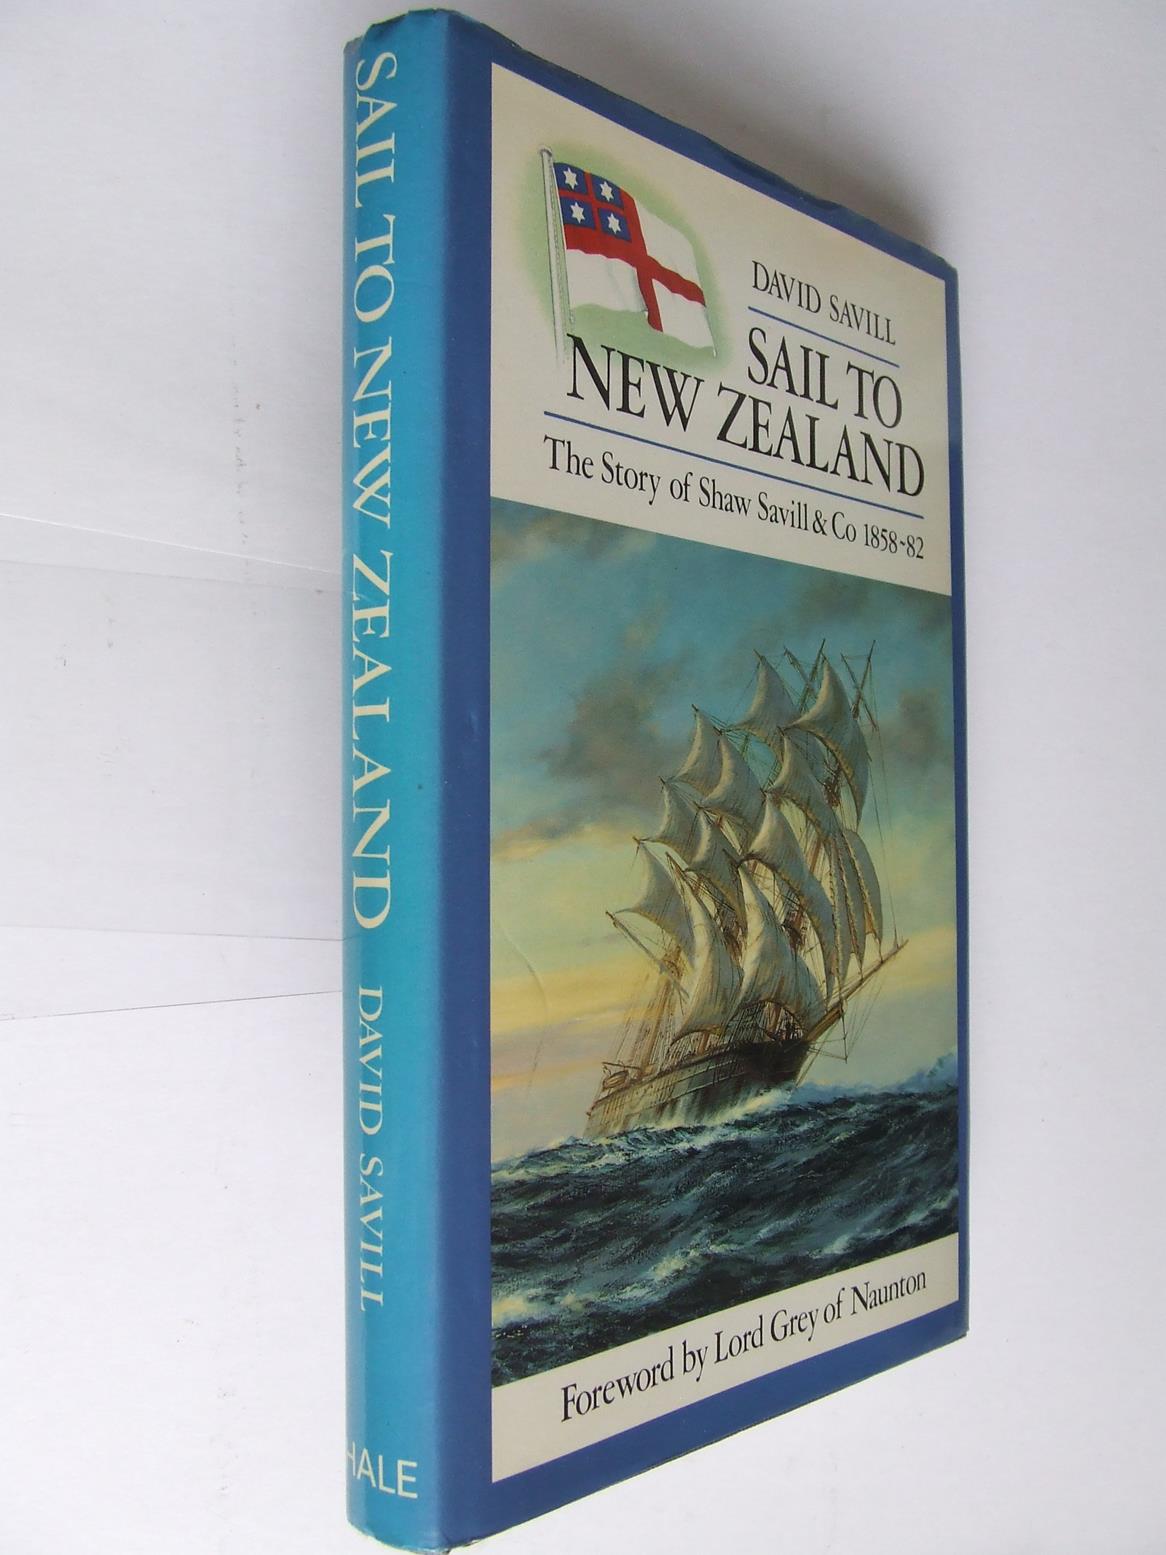 Sail to New Zealand. the story of of Shaw Savill & Co. 1858 - 1882